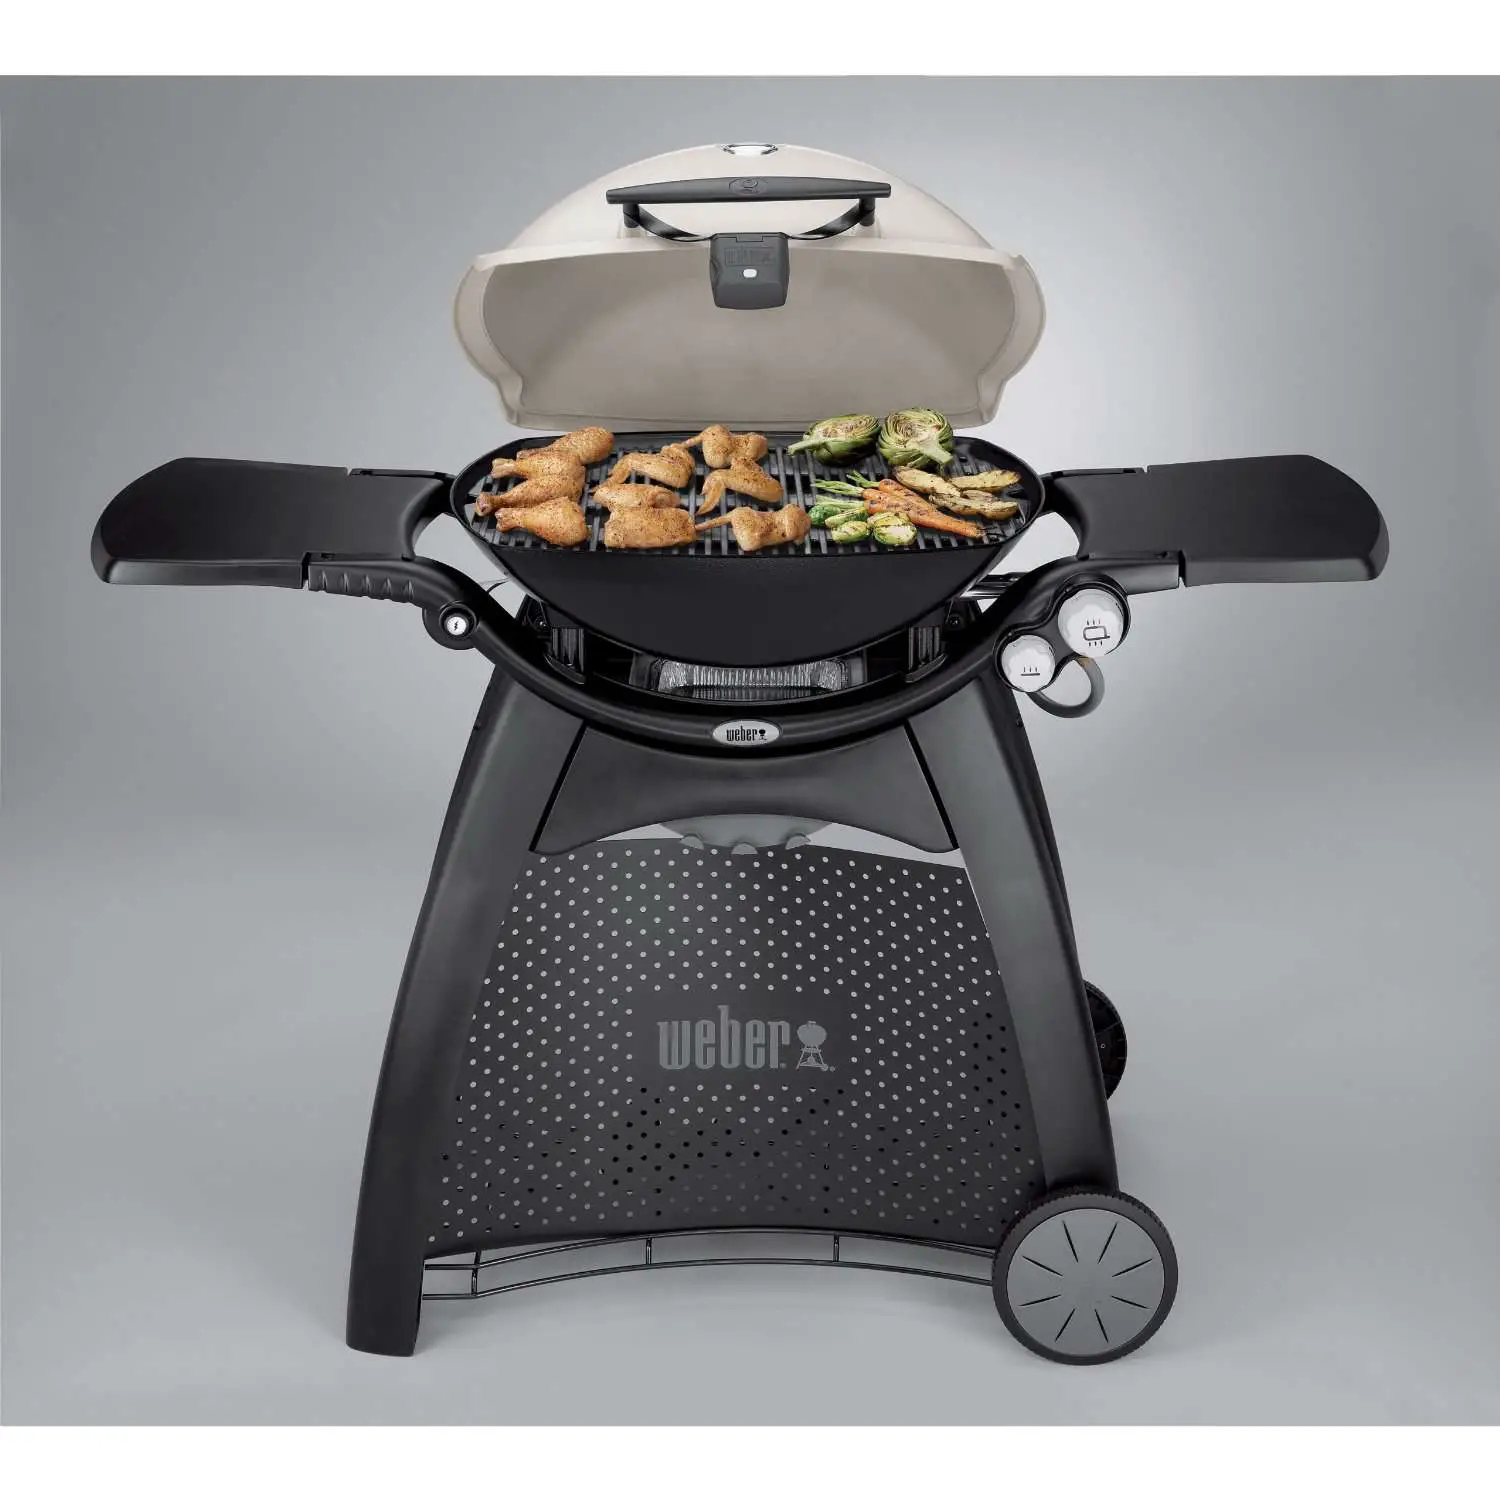 Weber Q 3200 propane and natural gas grill